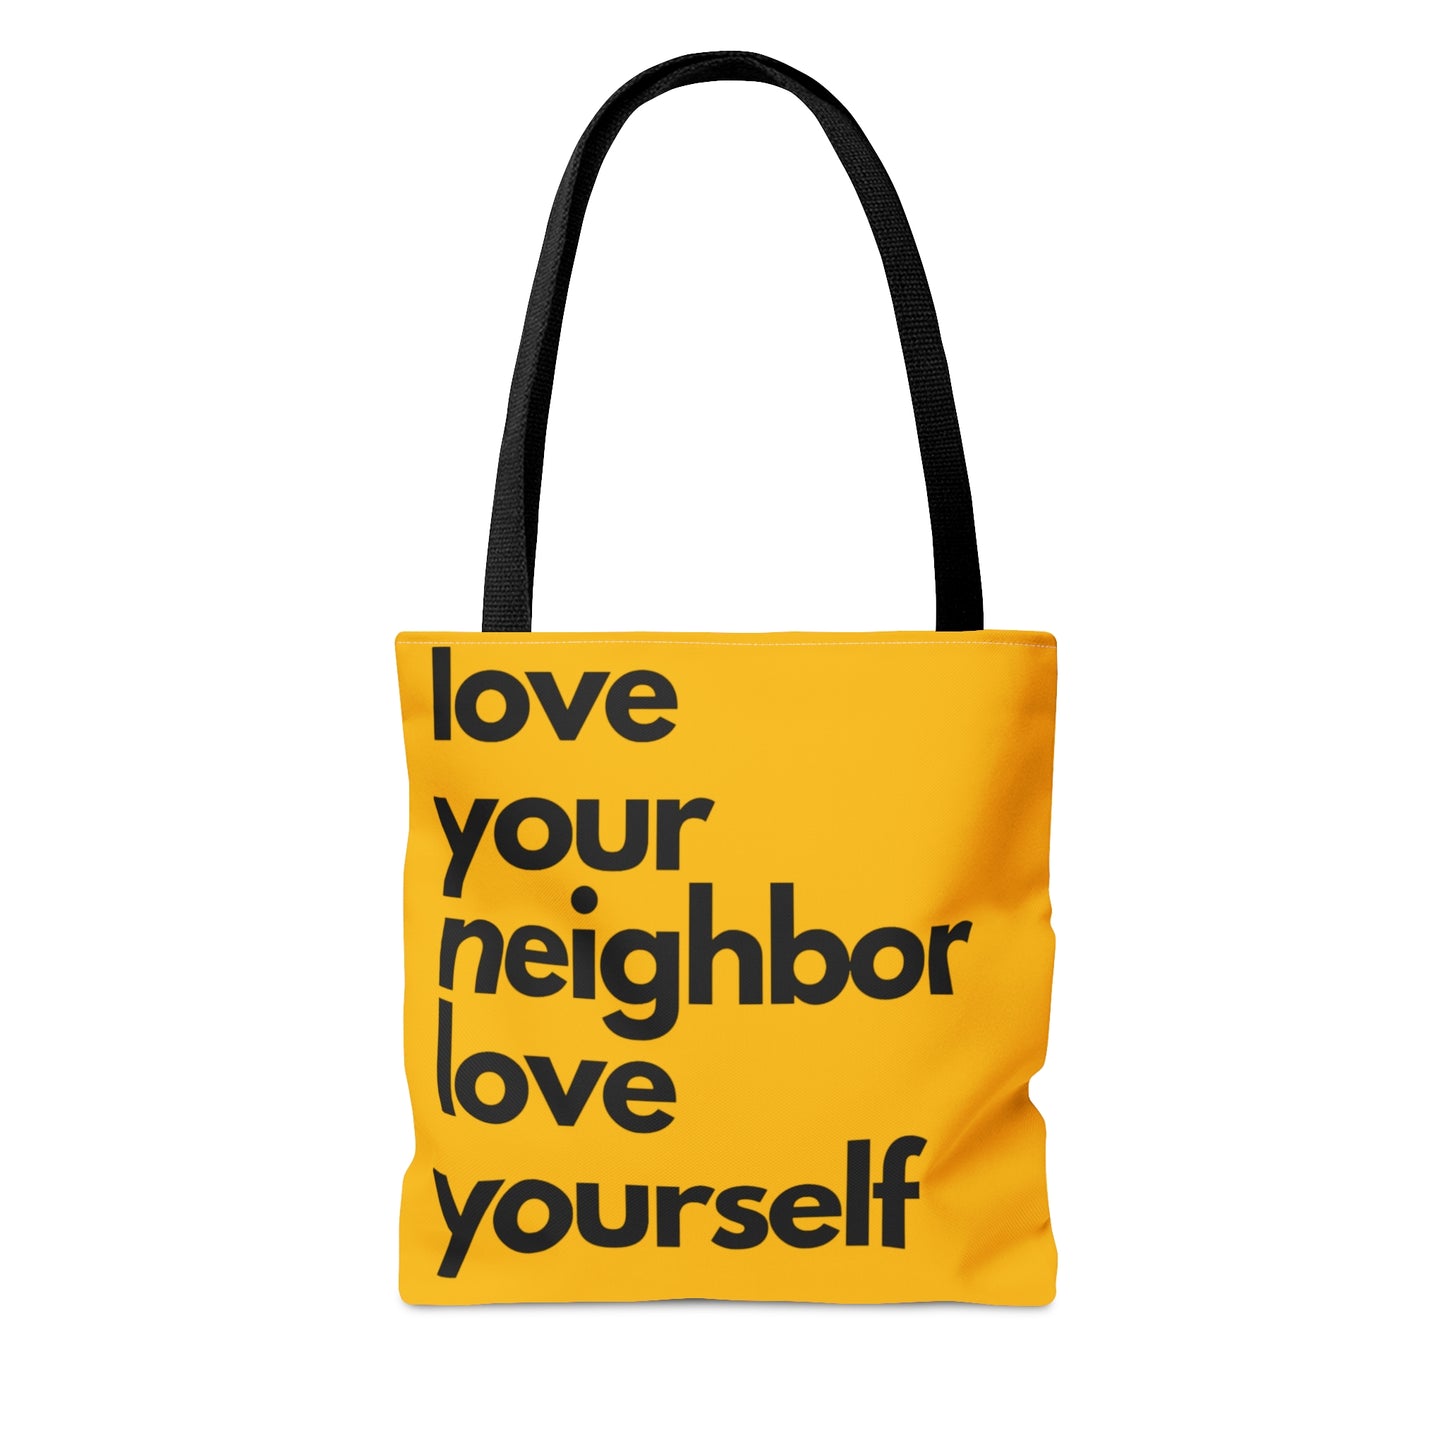 Inspiring and powerful message of love on both sides of this tote bag. Come in 3 sizes to meet your needs.